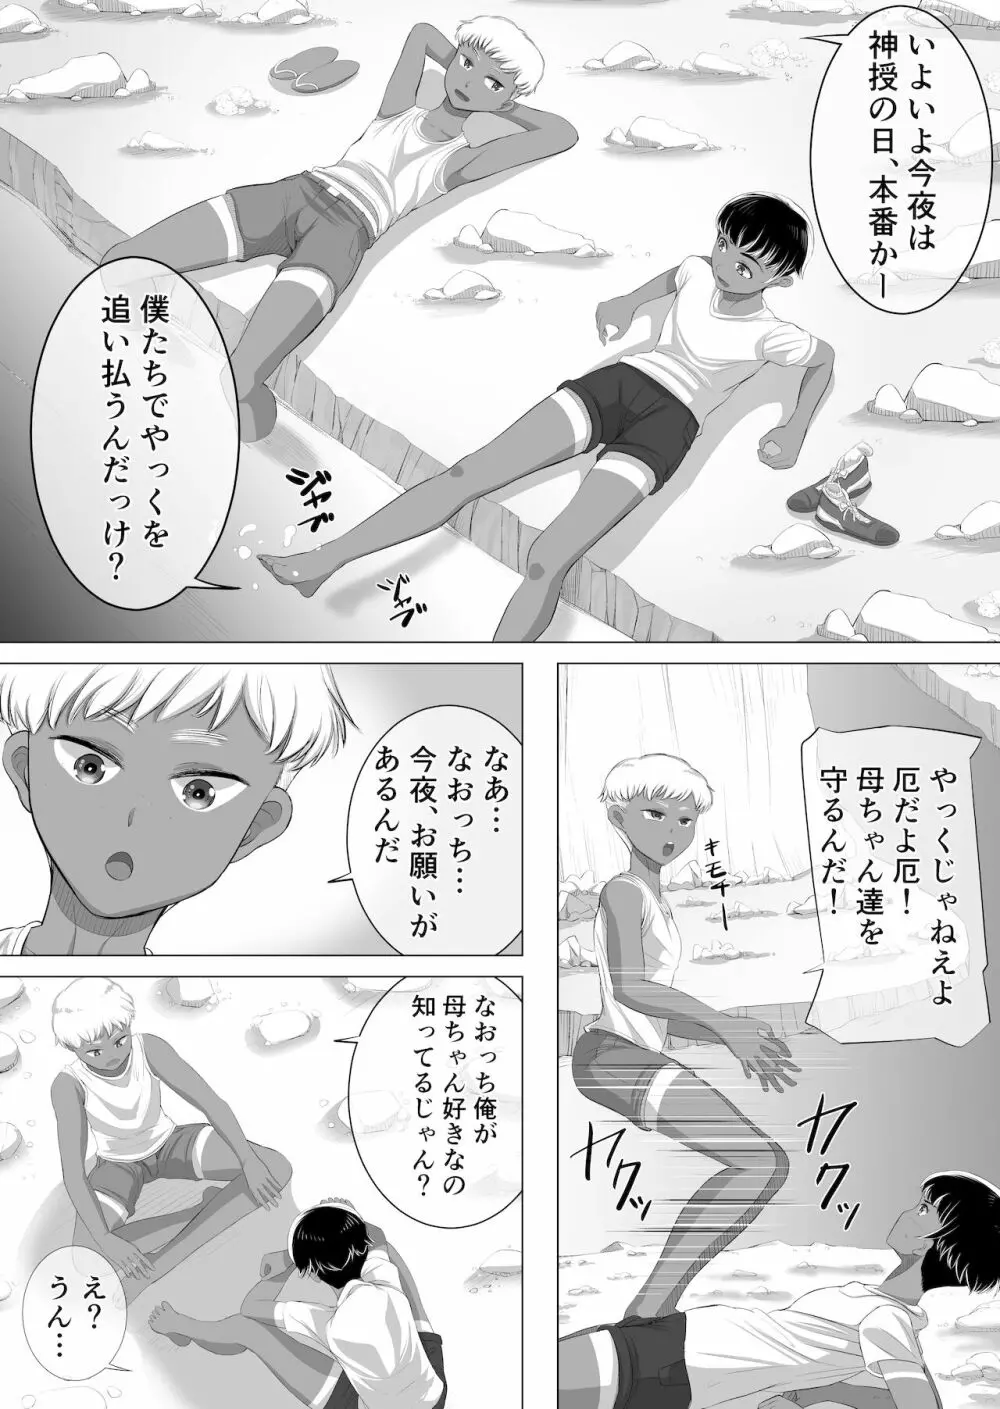 The 神孕村～やっくをやっつけろの巻～ Page.14